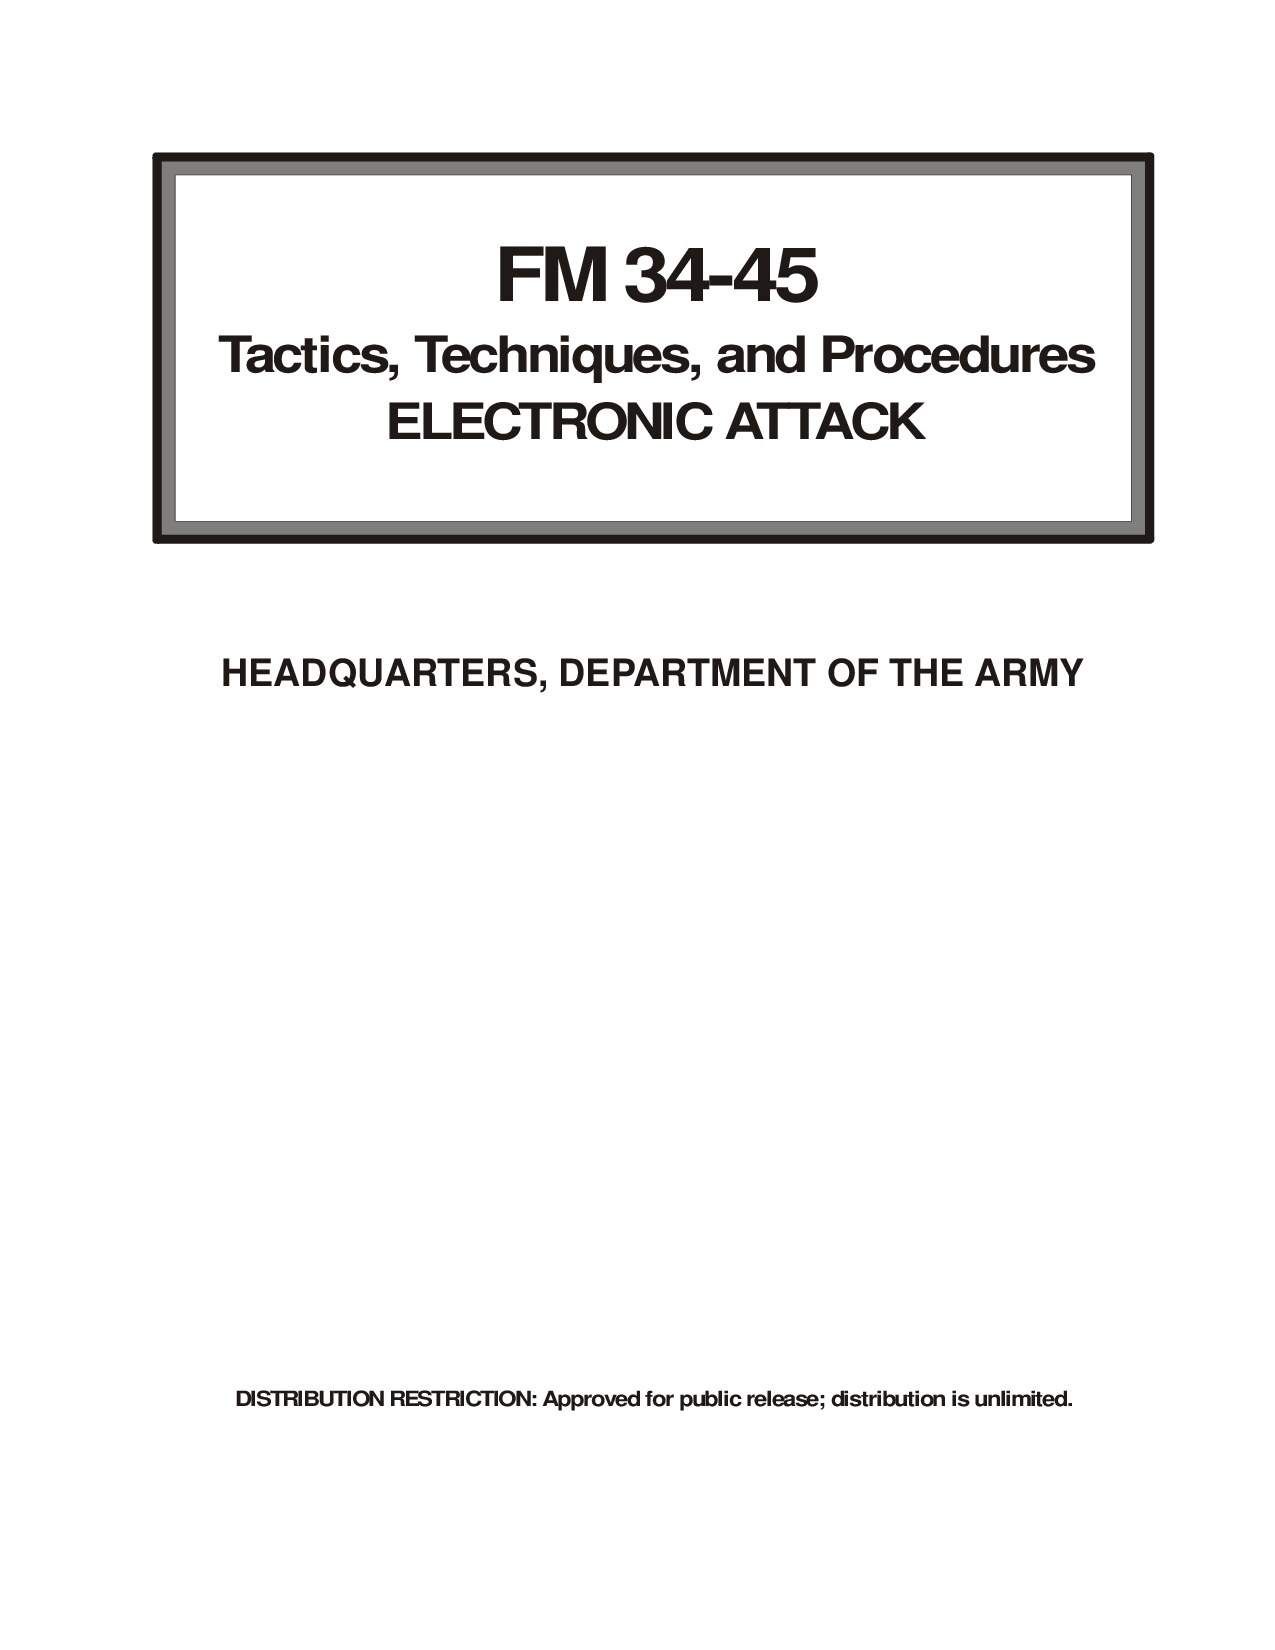 FM 34-45 Tactics, Techniques, and Procedures for Electronic Attack